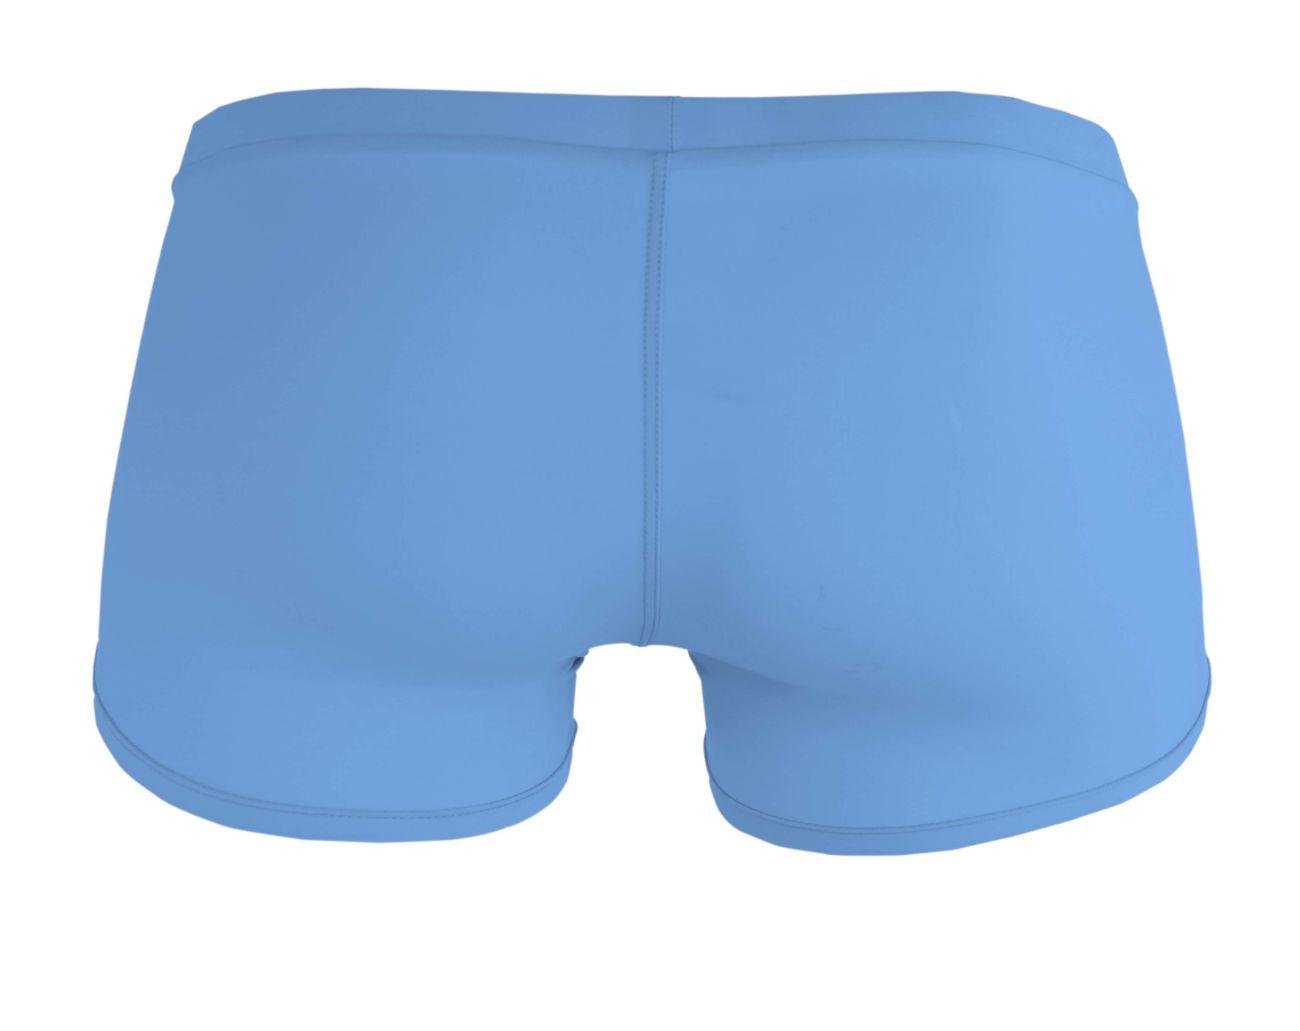 image of product,Angel Trunks - SEXYEONE